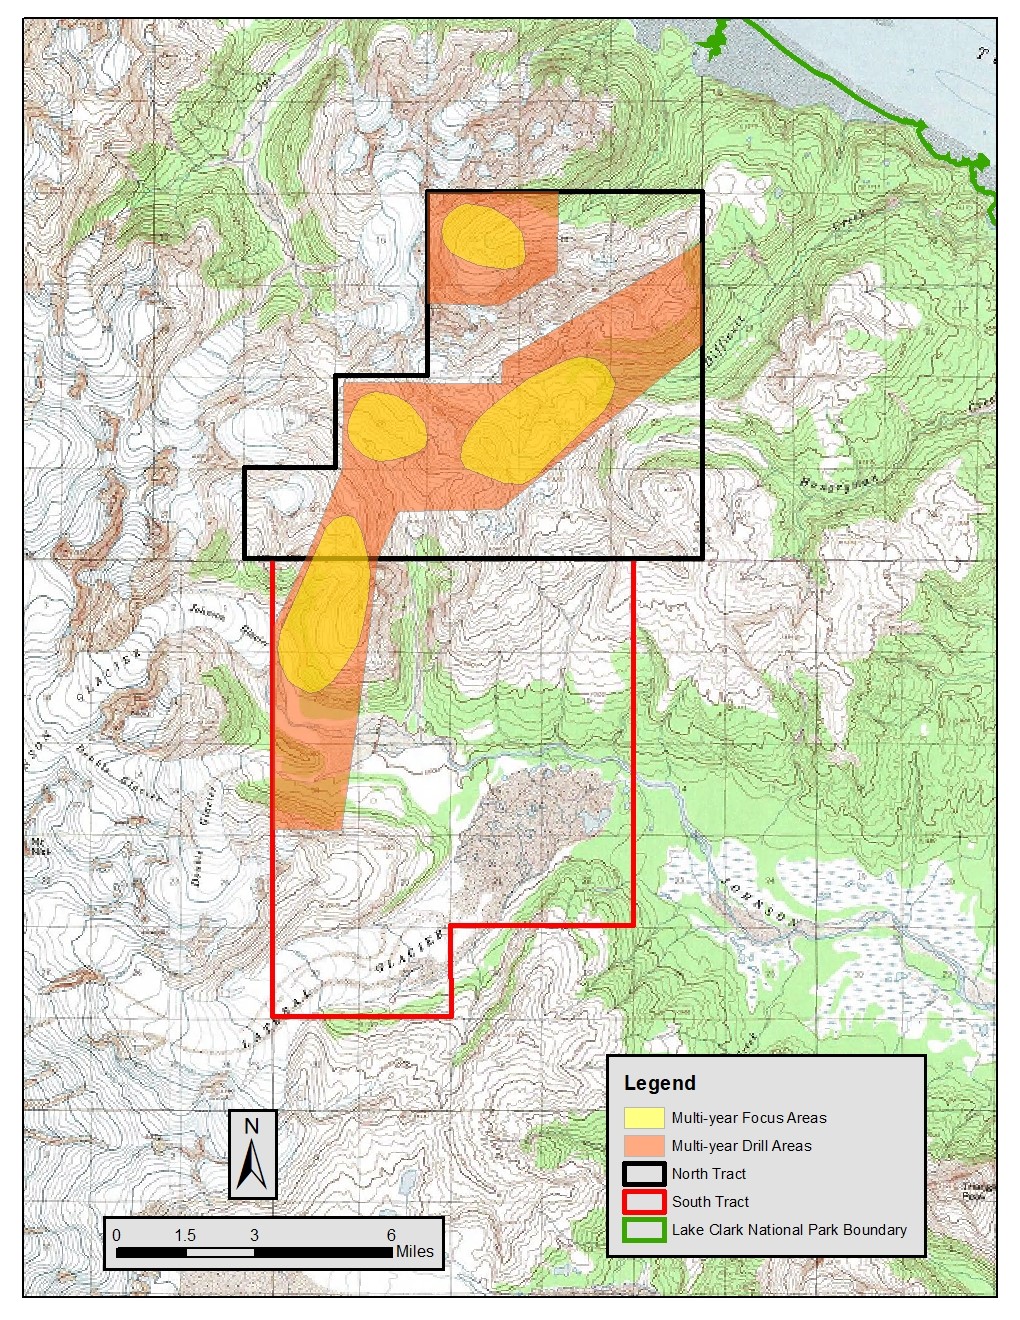 map image of Johnson Tract and the areas of the EA focus